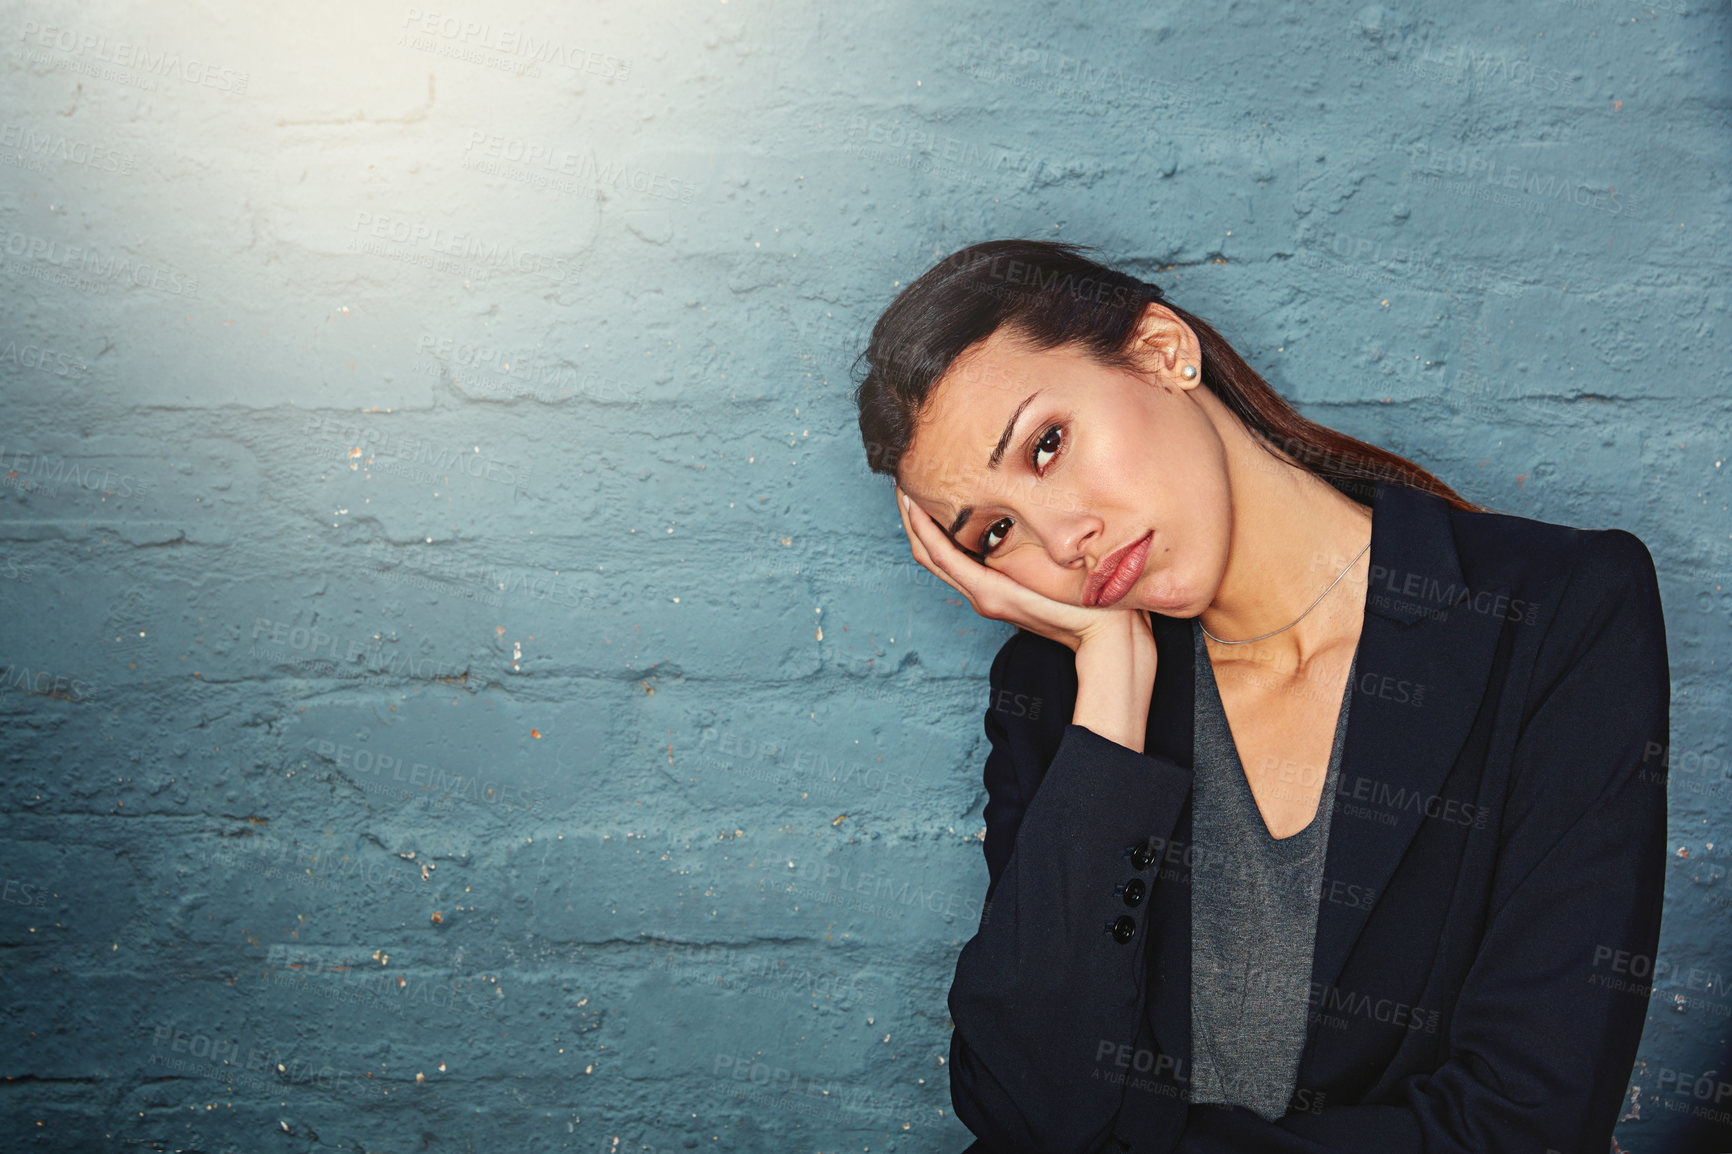 Buy stock photo Portrait of a overworked businesswoman posing against a brick wall